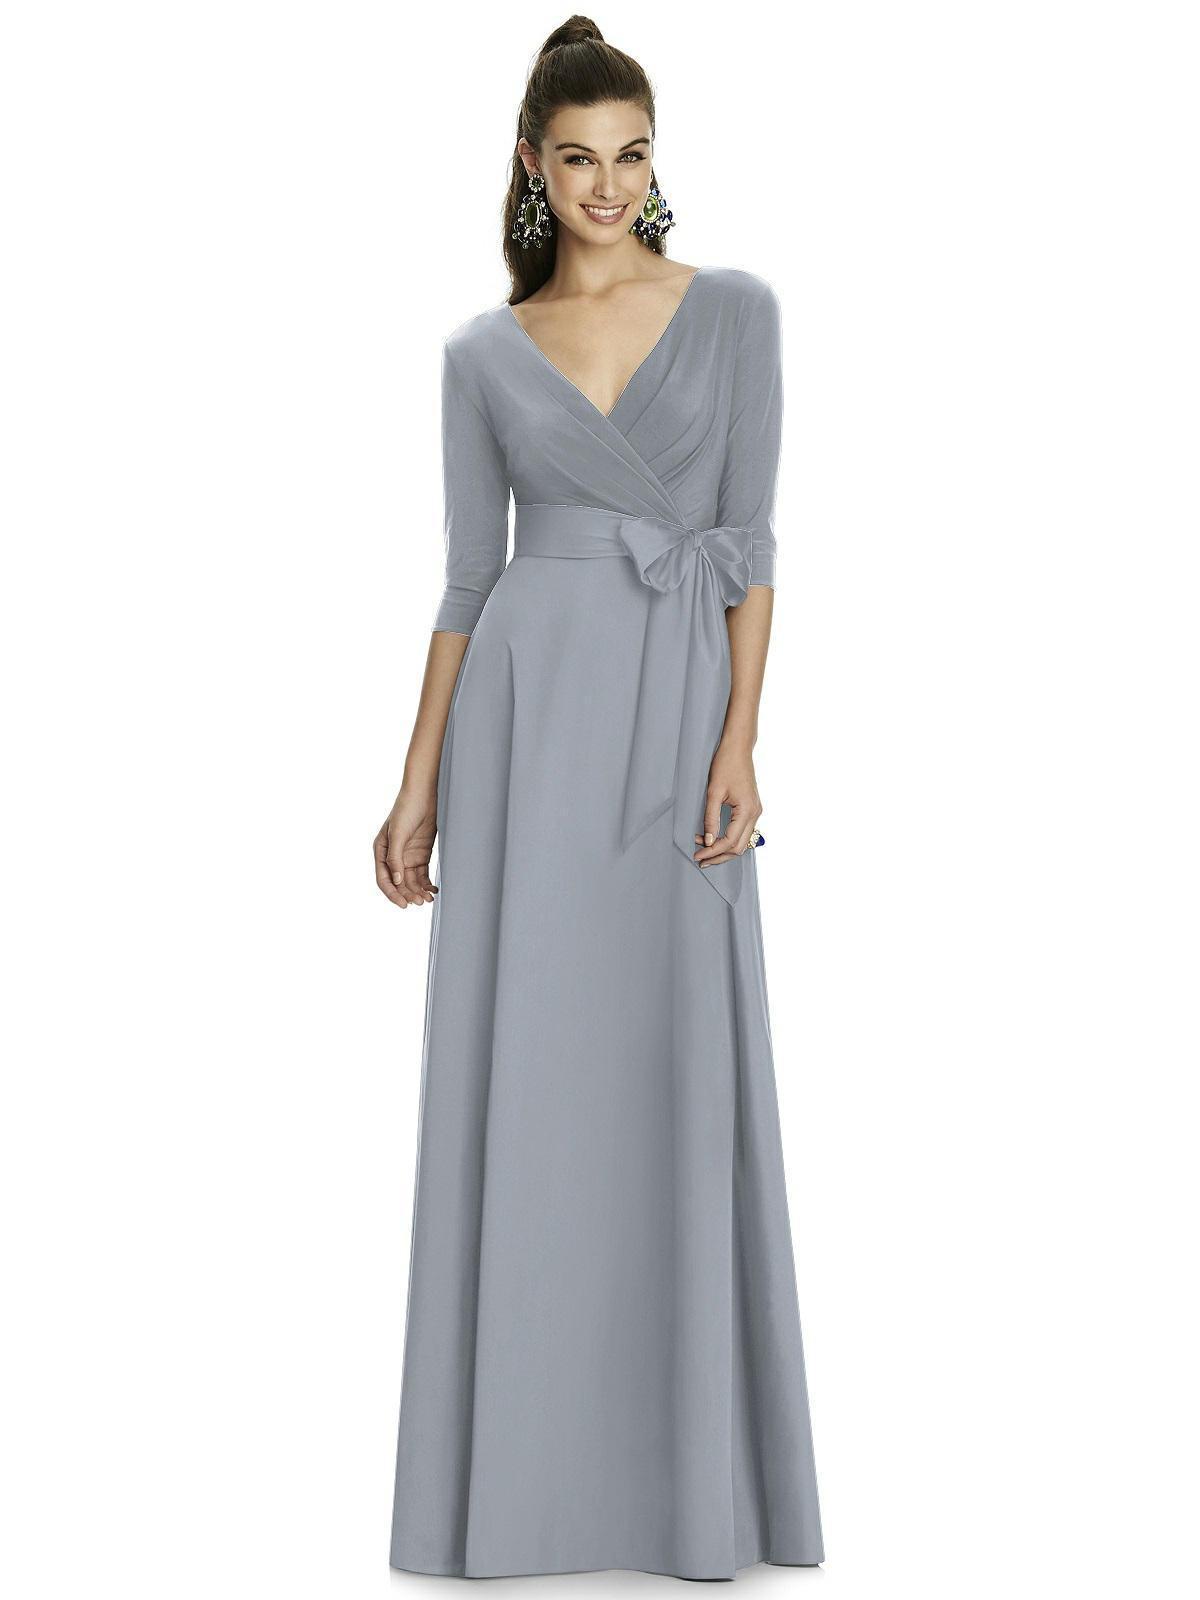 Alfred Sung - D736 Quarter Sleeve V Neck Long Formal Dress with Sash In Silver and Gray